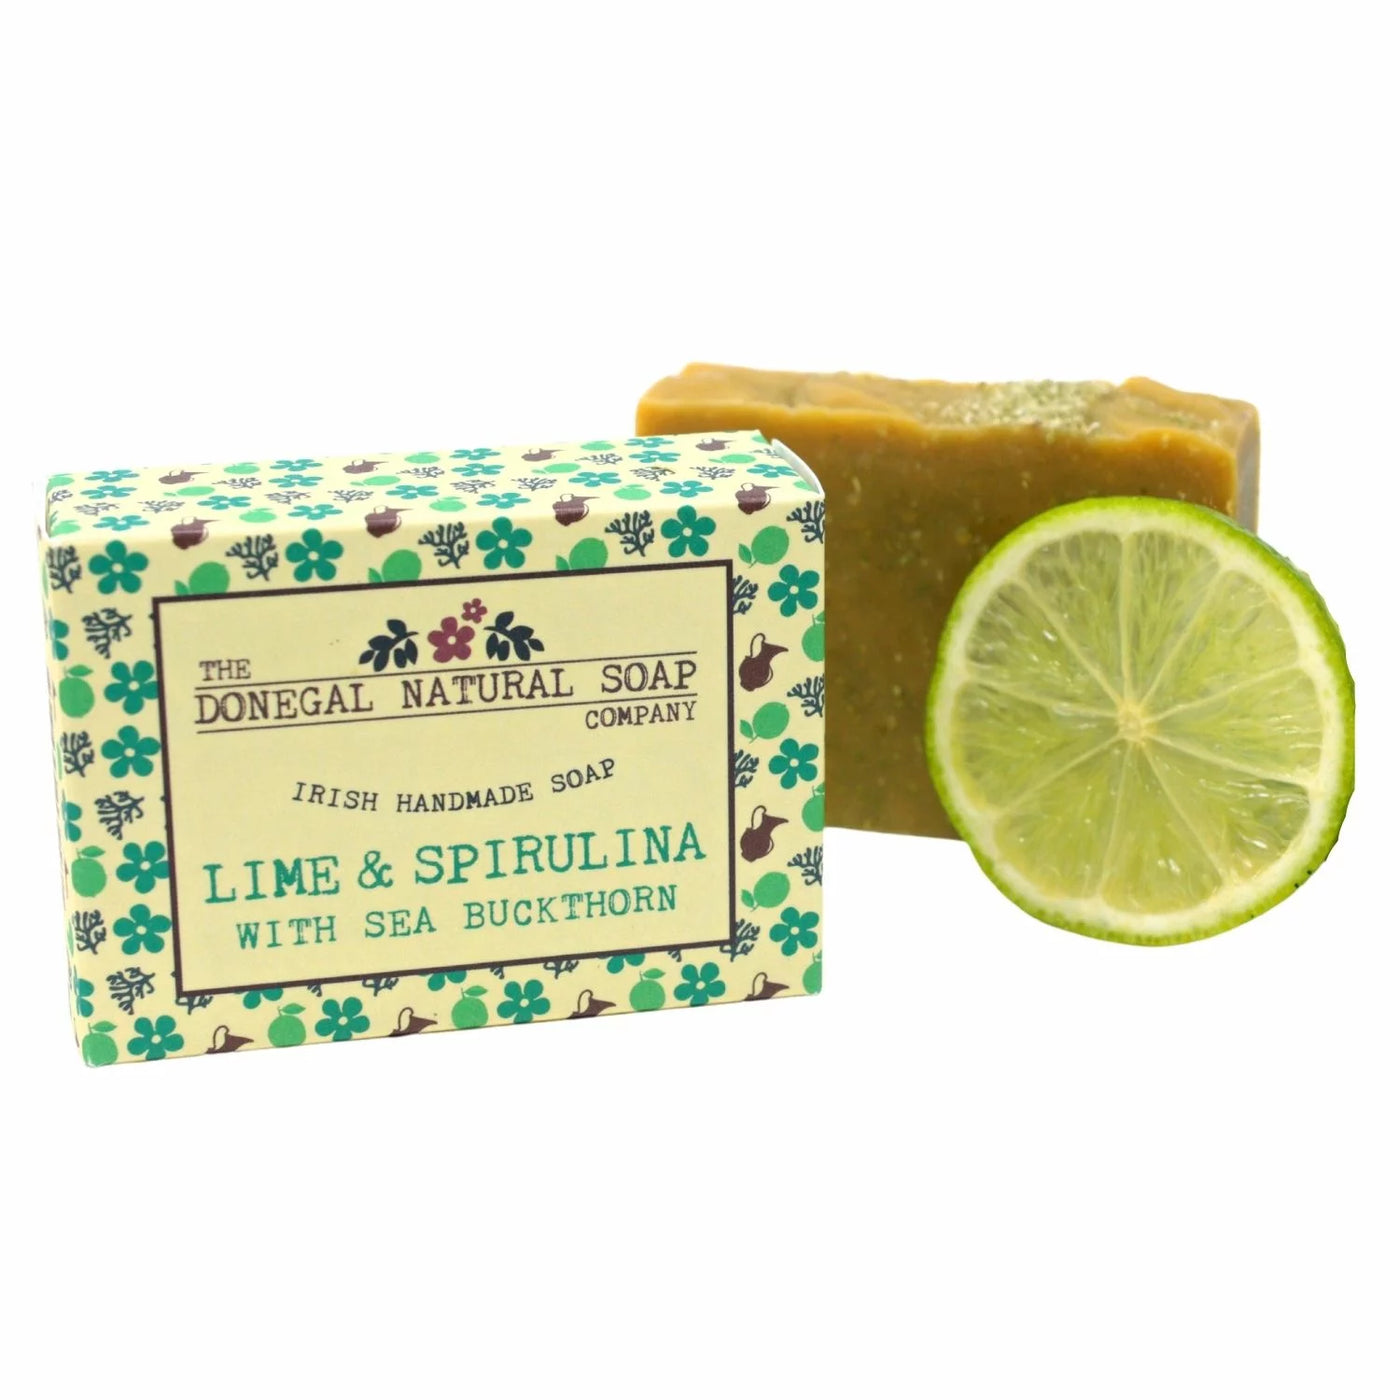 Donegal Natural Soap